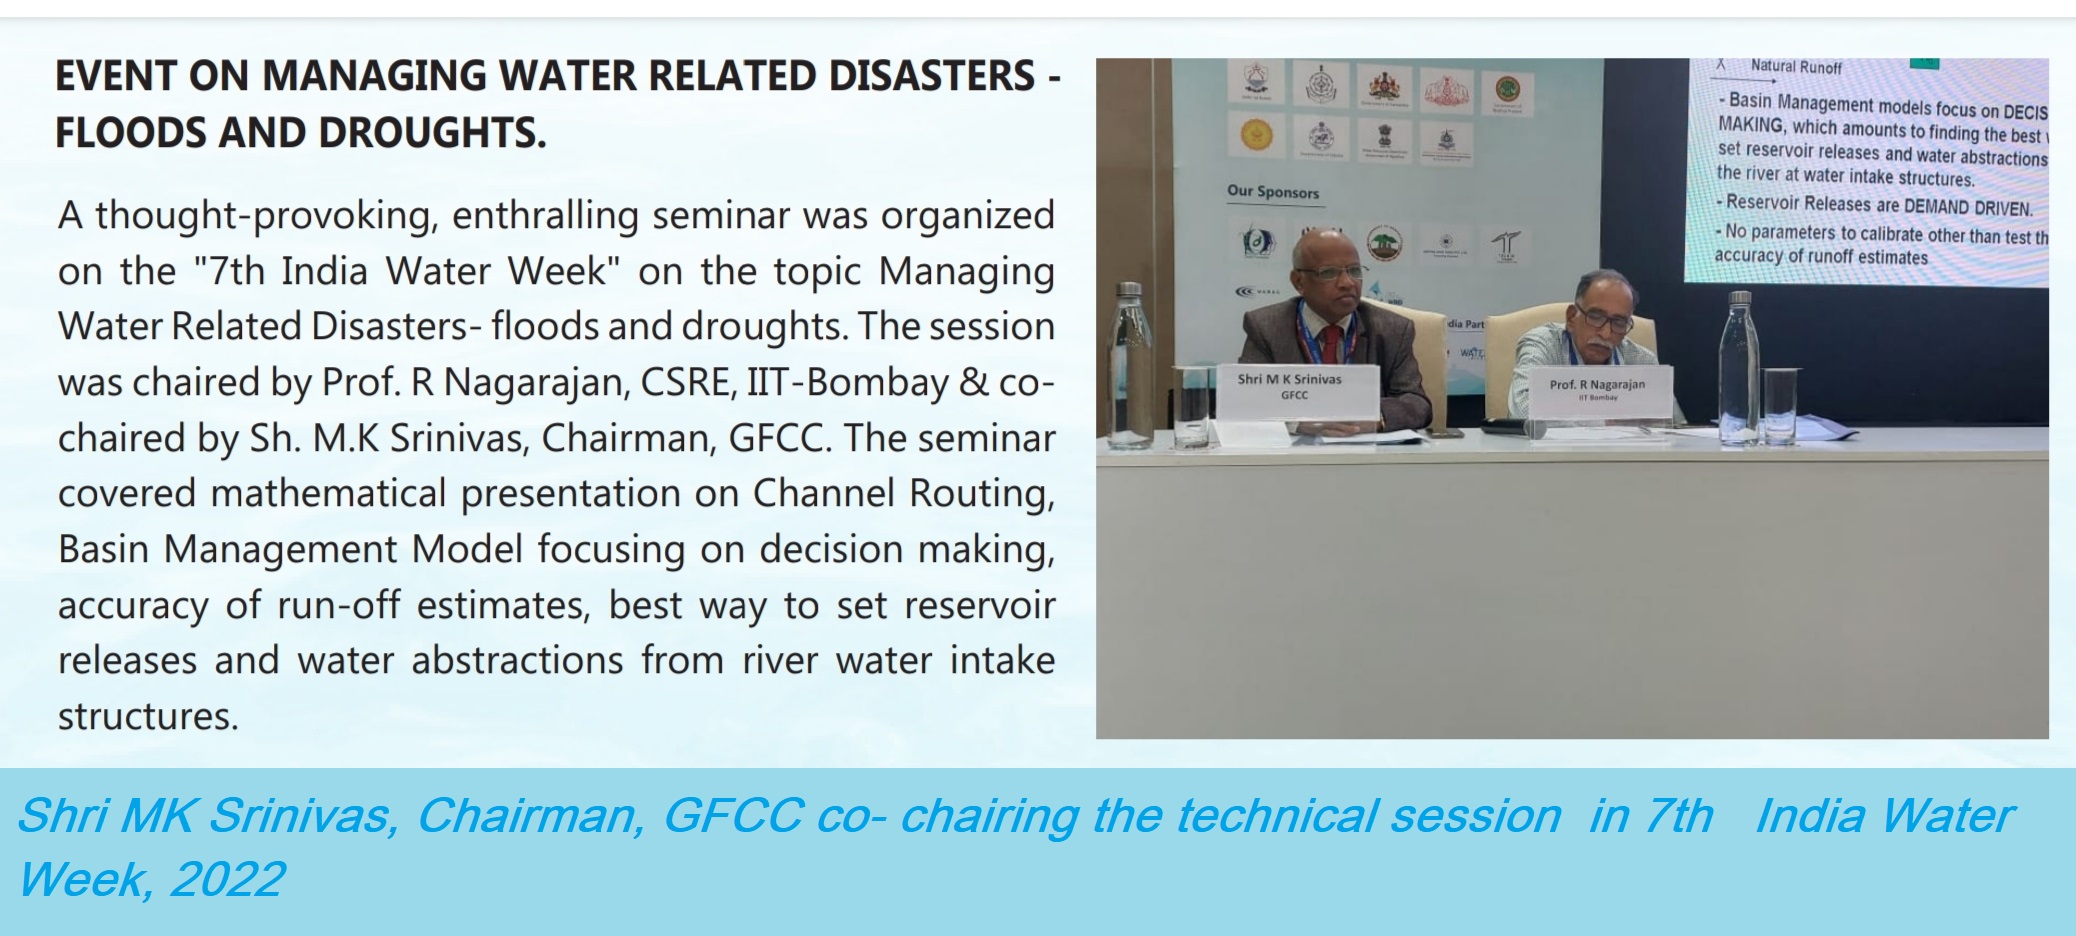  Shri MK Srinivas, Chairman, GFCC co- chairing the technical session  in 7th India Water Week, 2022